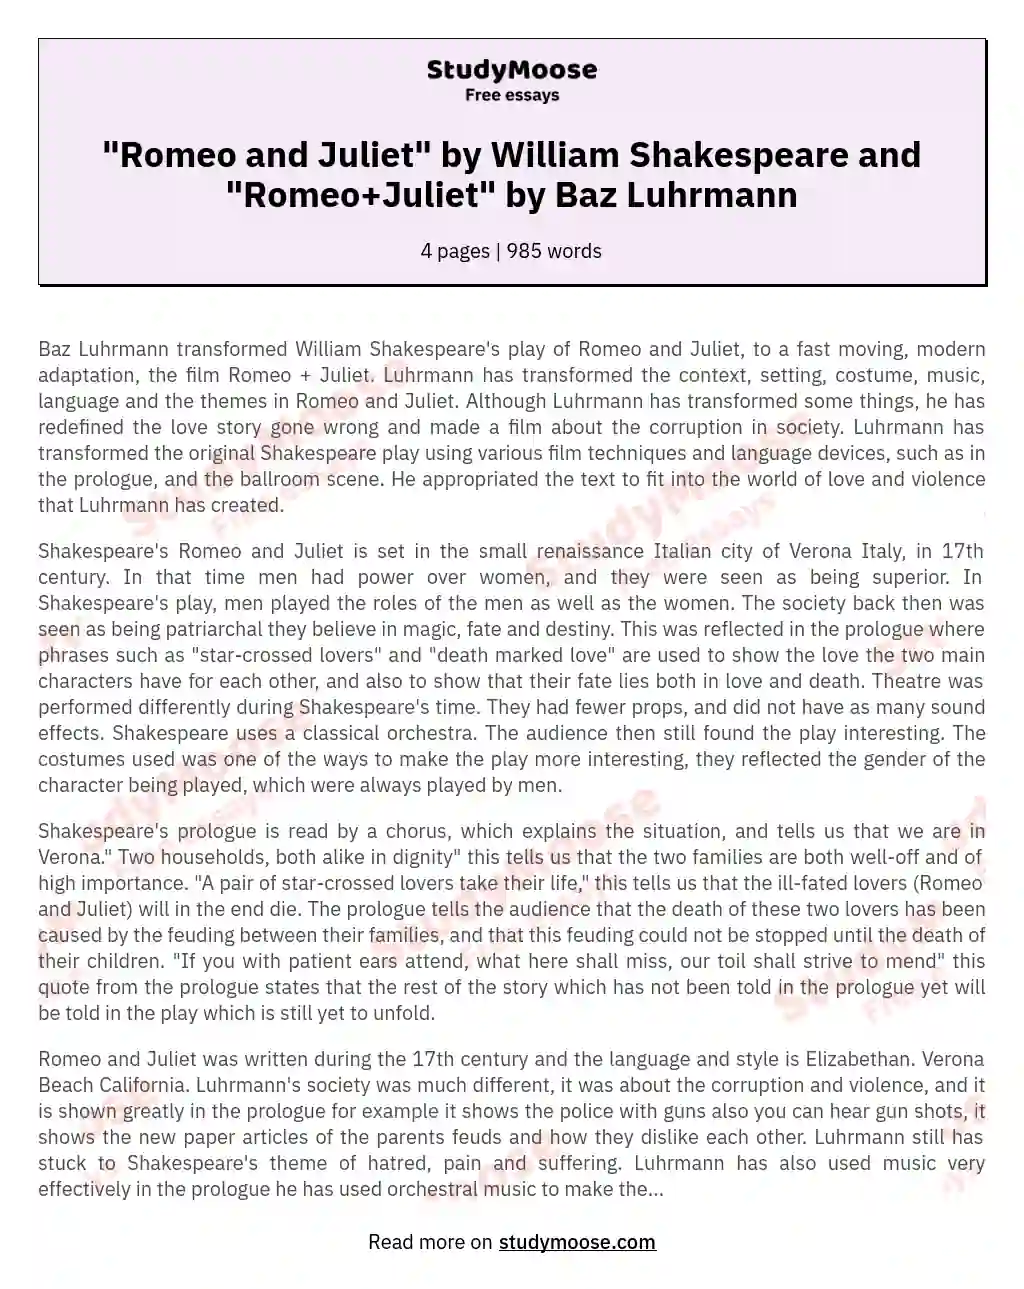 "Romeo and Juliet" by William Shakespeare and "Romeo+Juliet" by Baz Luhrmann essay